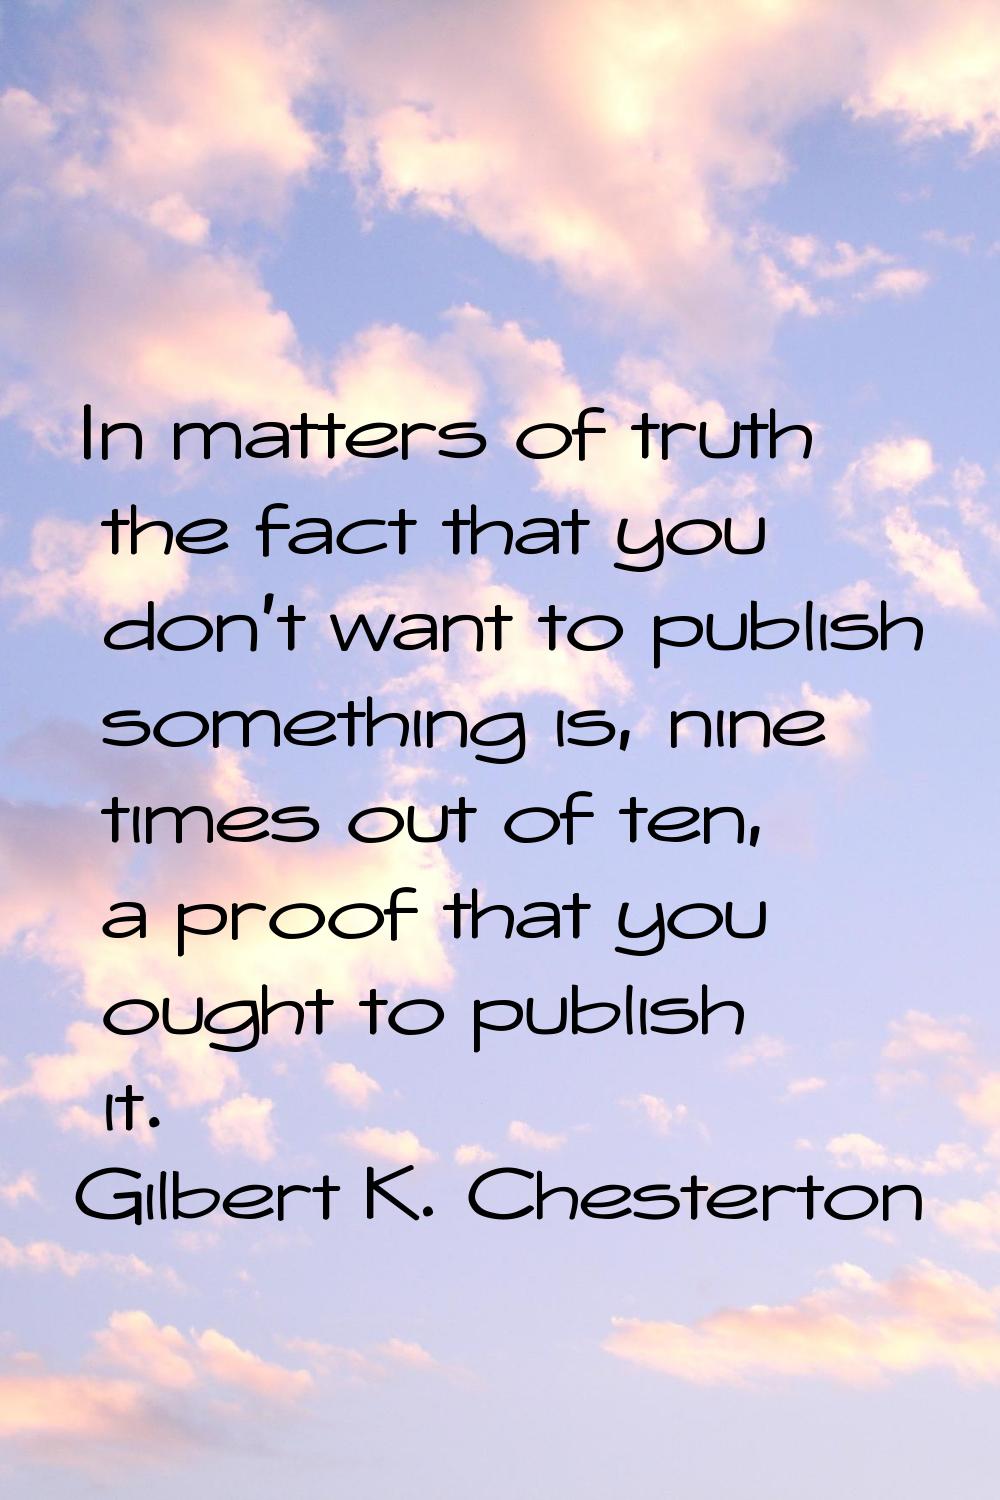 In matters of truth the fact that you don't want to publish something is, nine times out of ten, a 